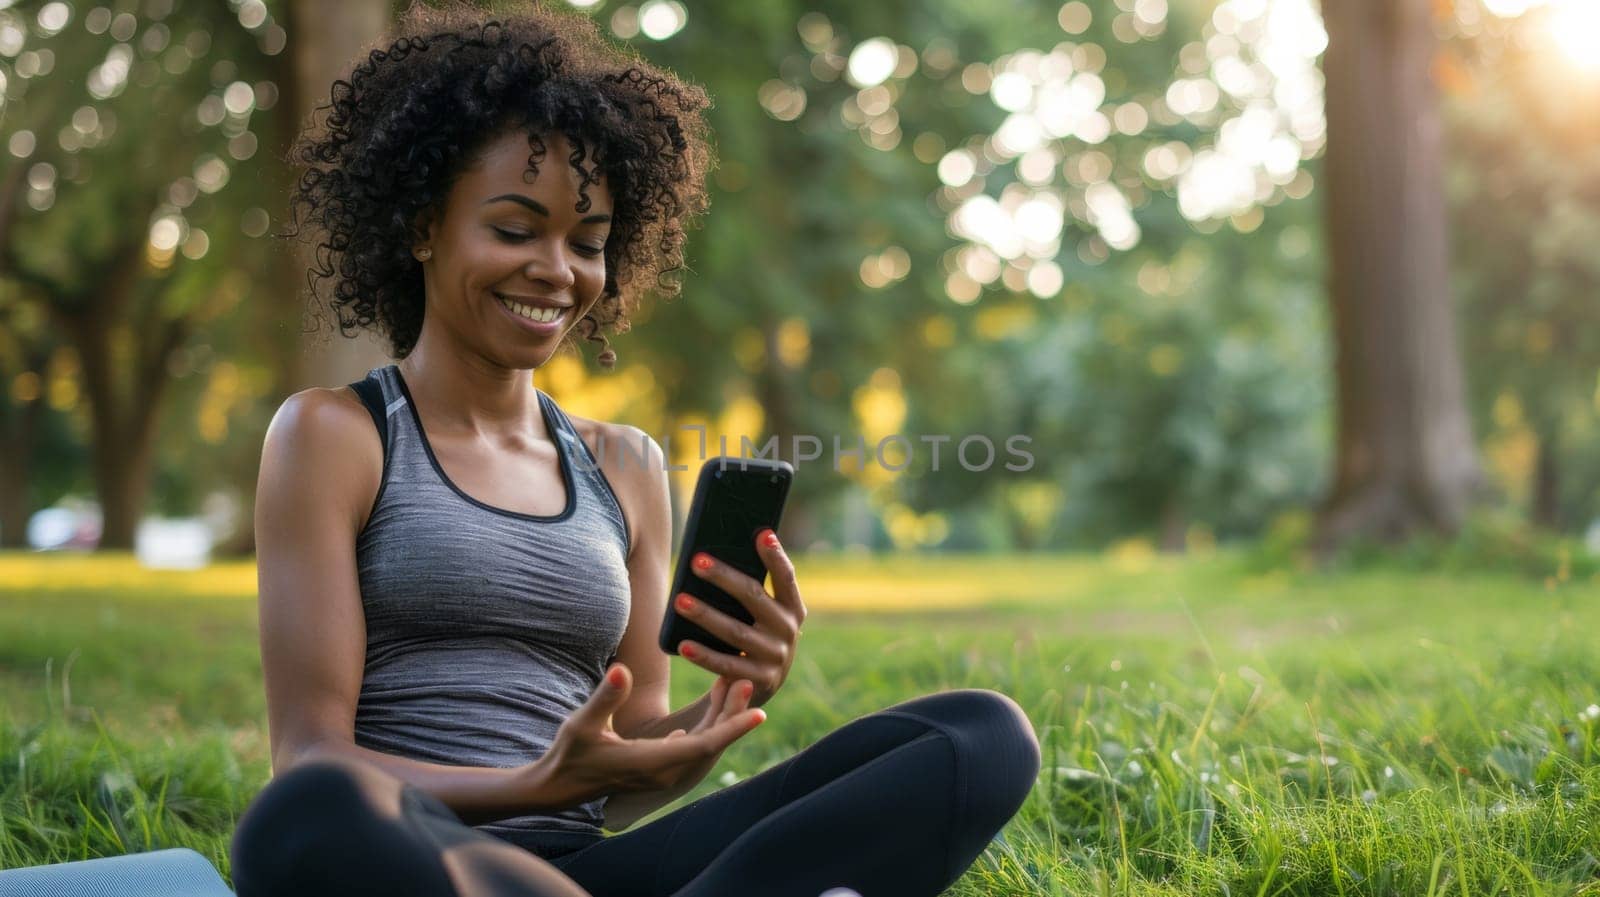 A woman sitting in the grass with a cell phone, AI by starush